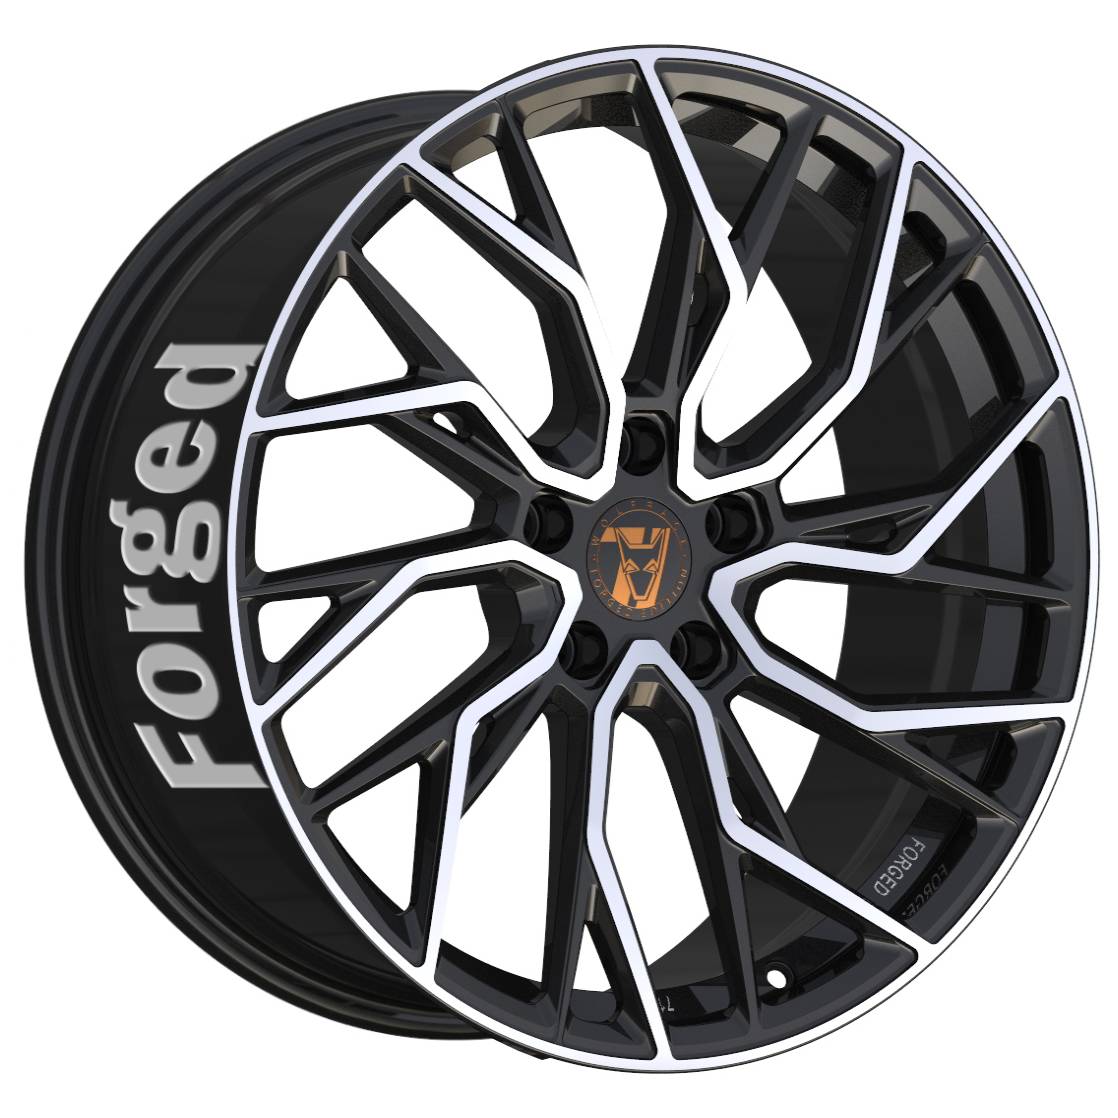 Jantes alu Demon Wheels 71 Forged Edition Voodoo Forged [11.5x24] -5x114.3- ET 35